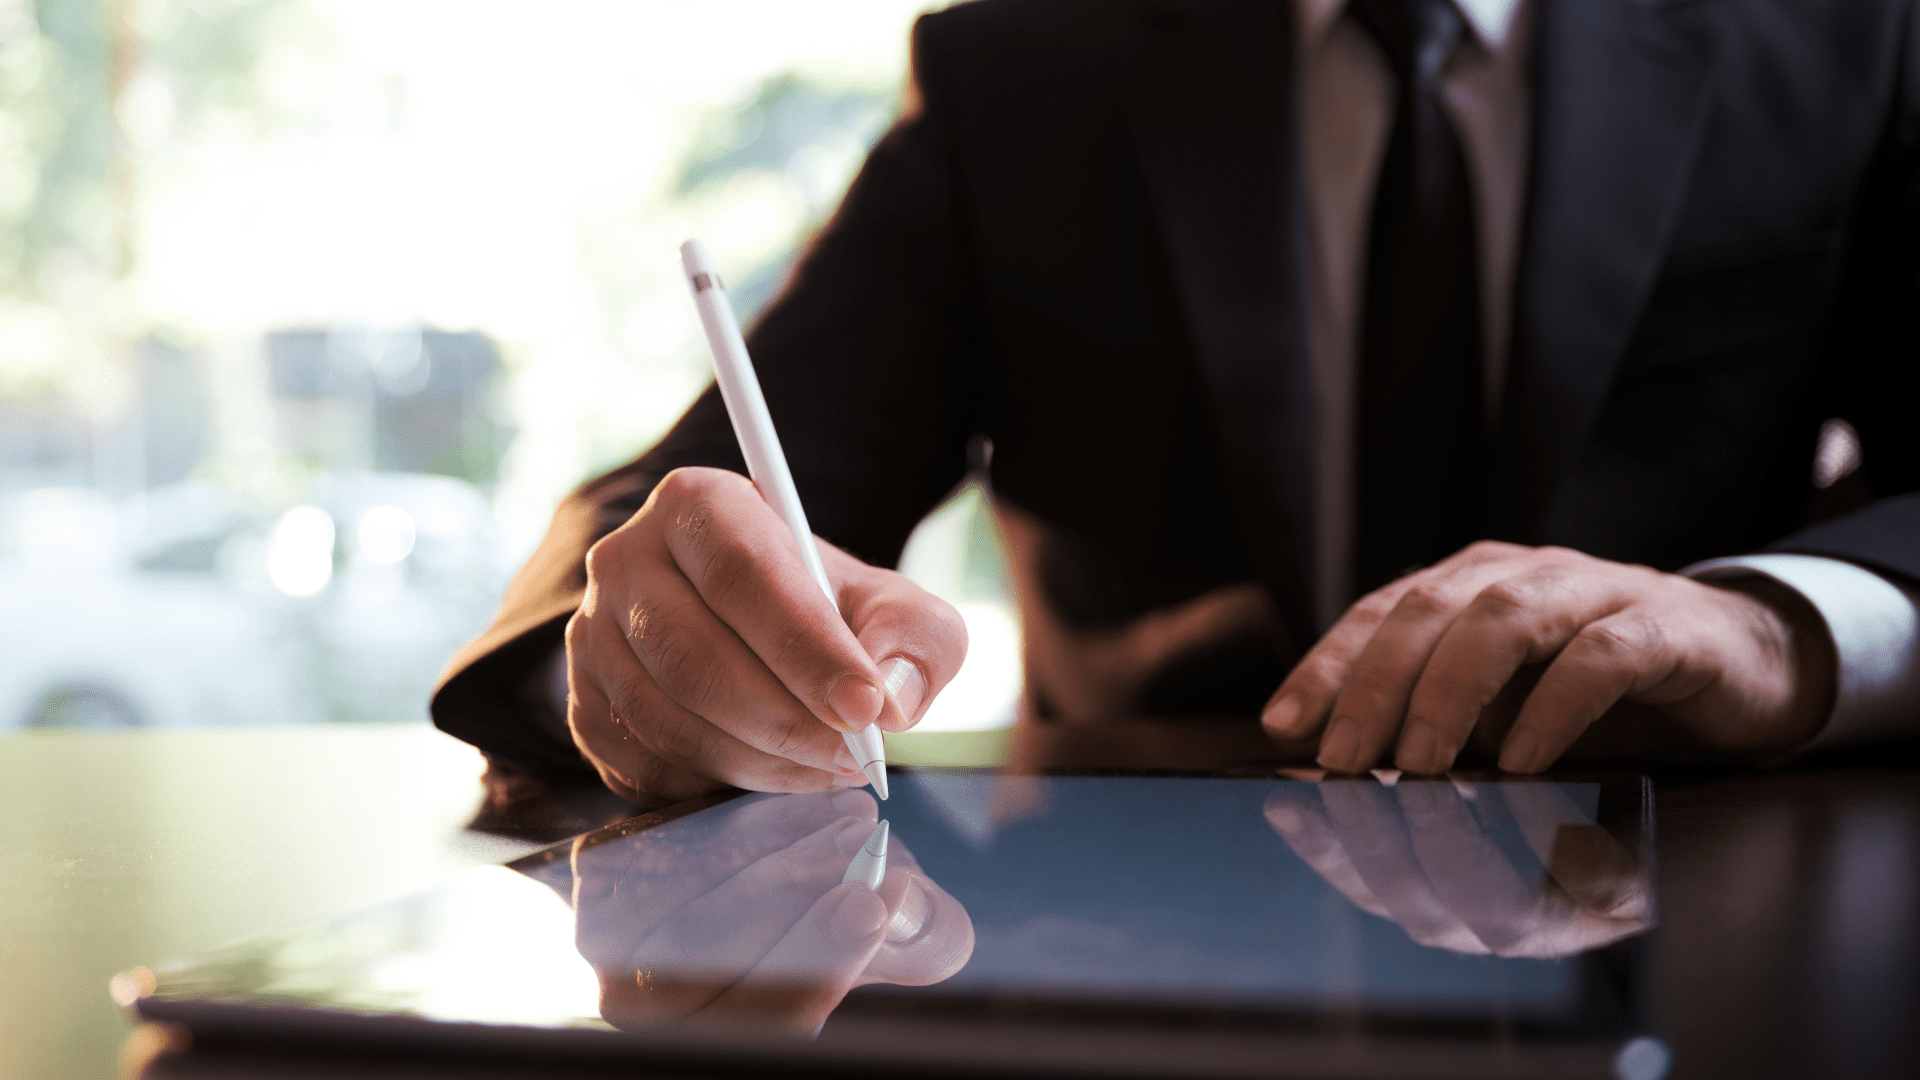 How to Request a Signature on a Document